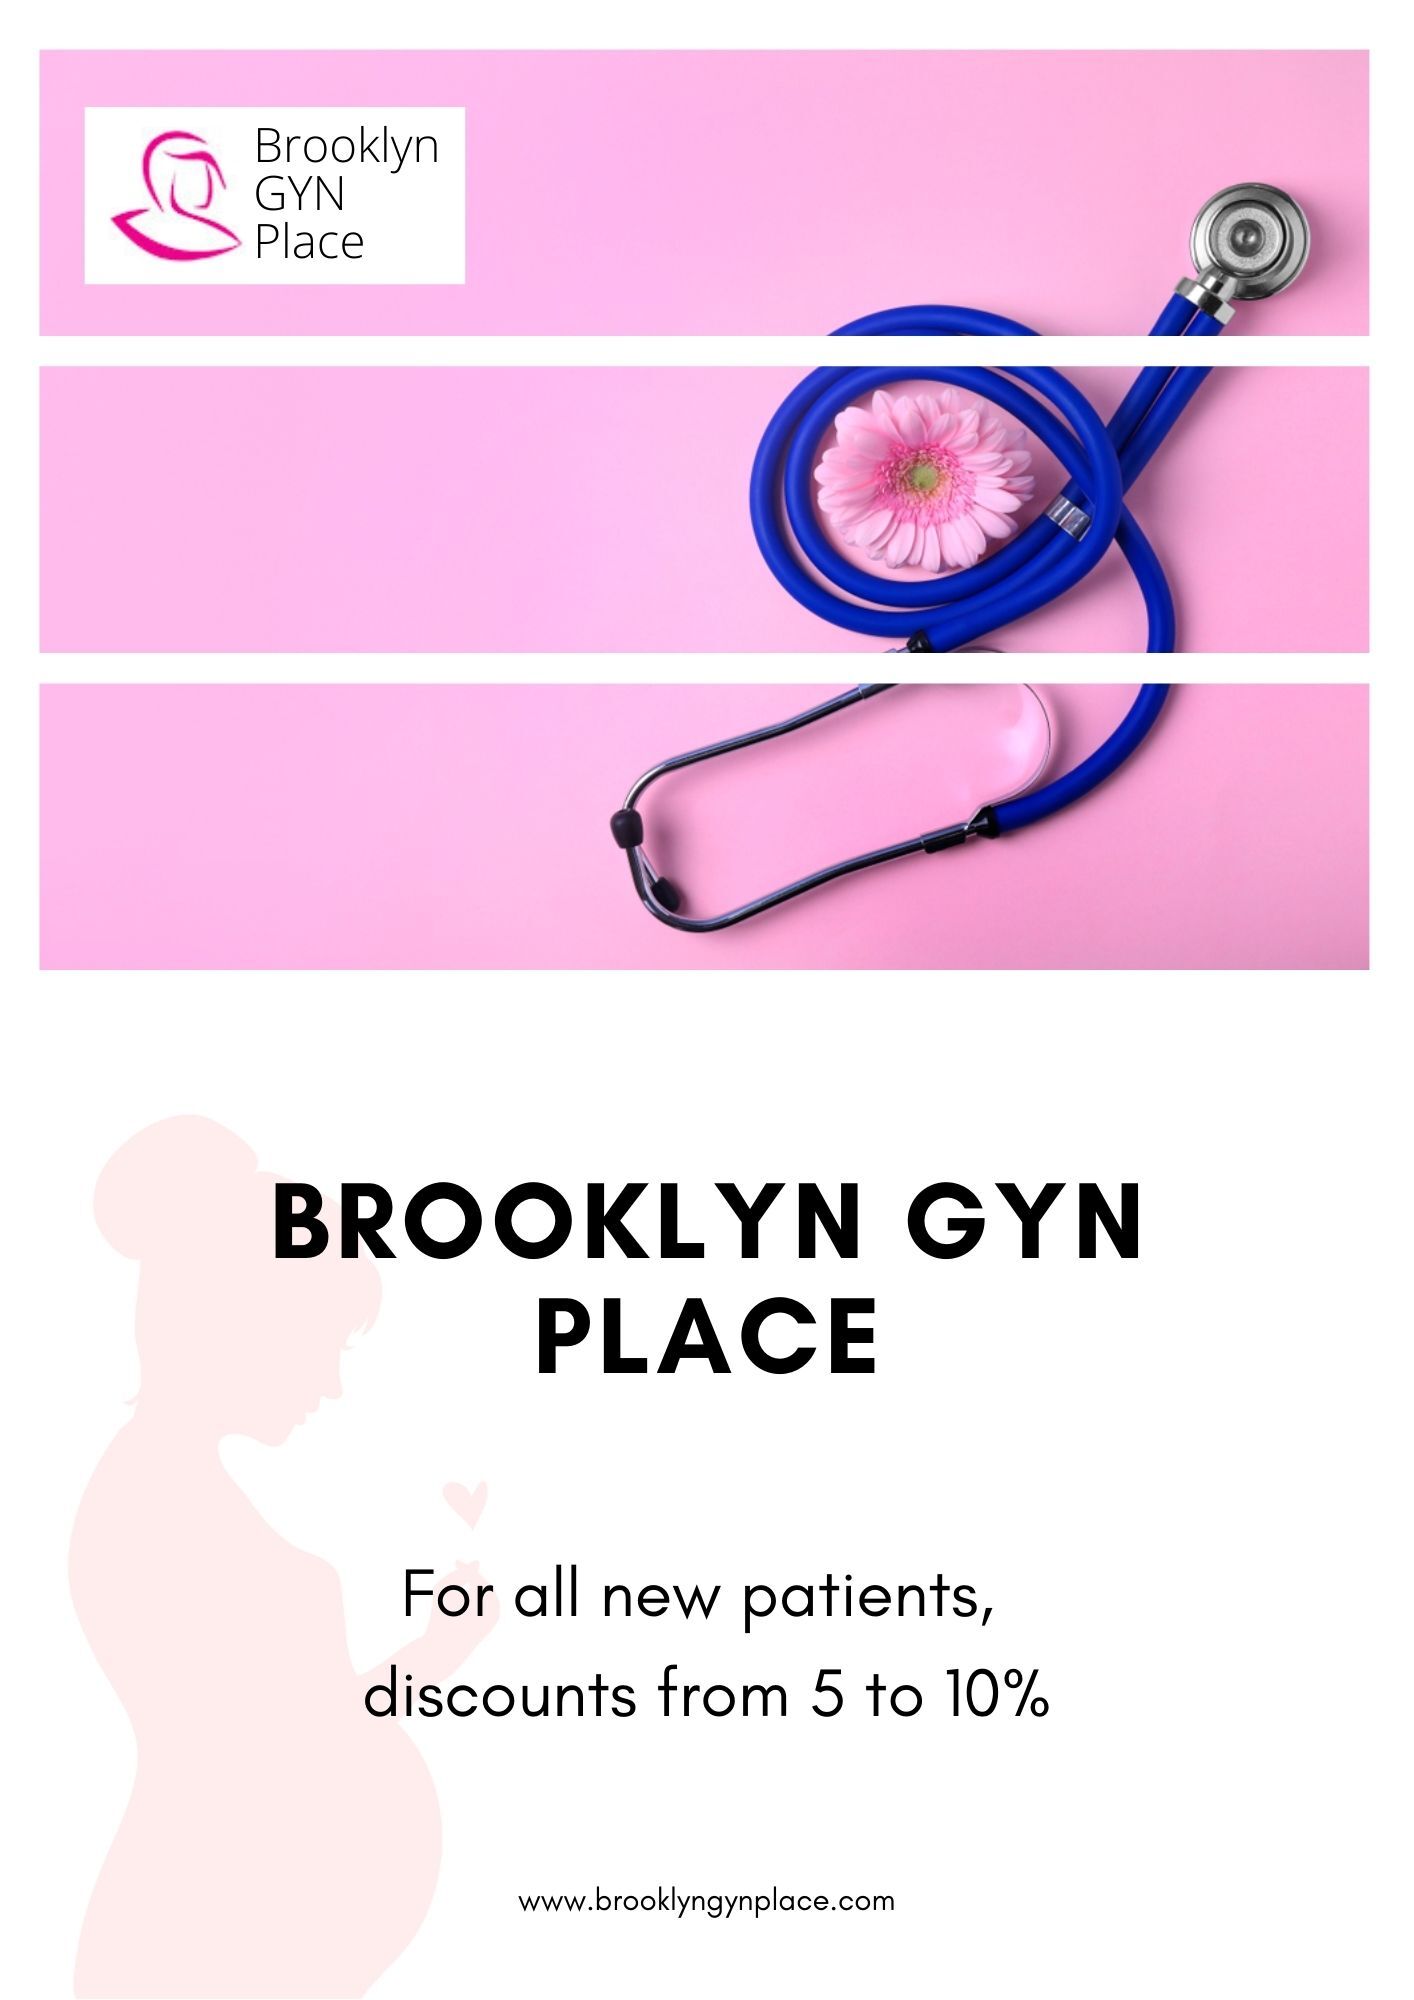 Brooklyn GYN Place offers a discount, New York, United States